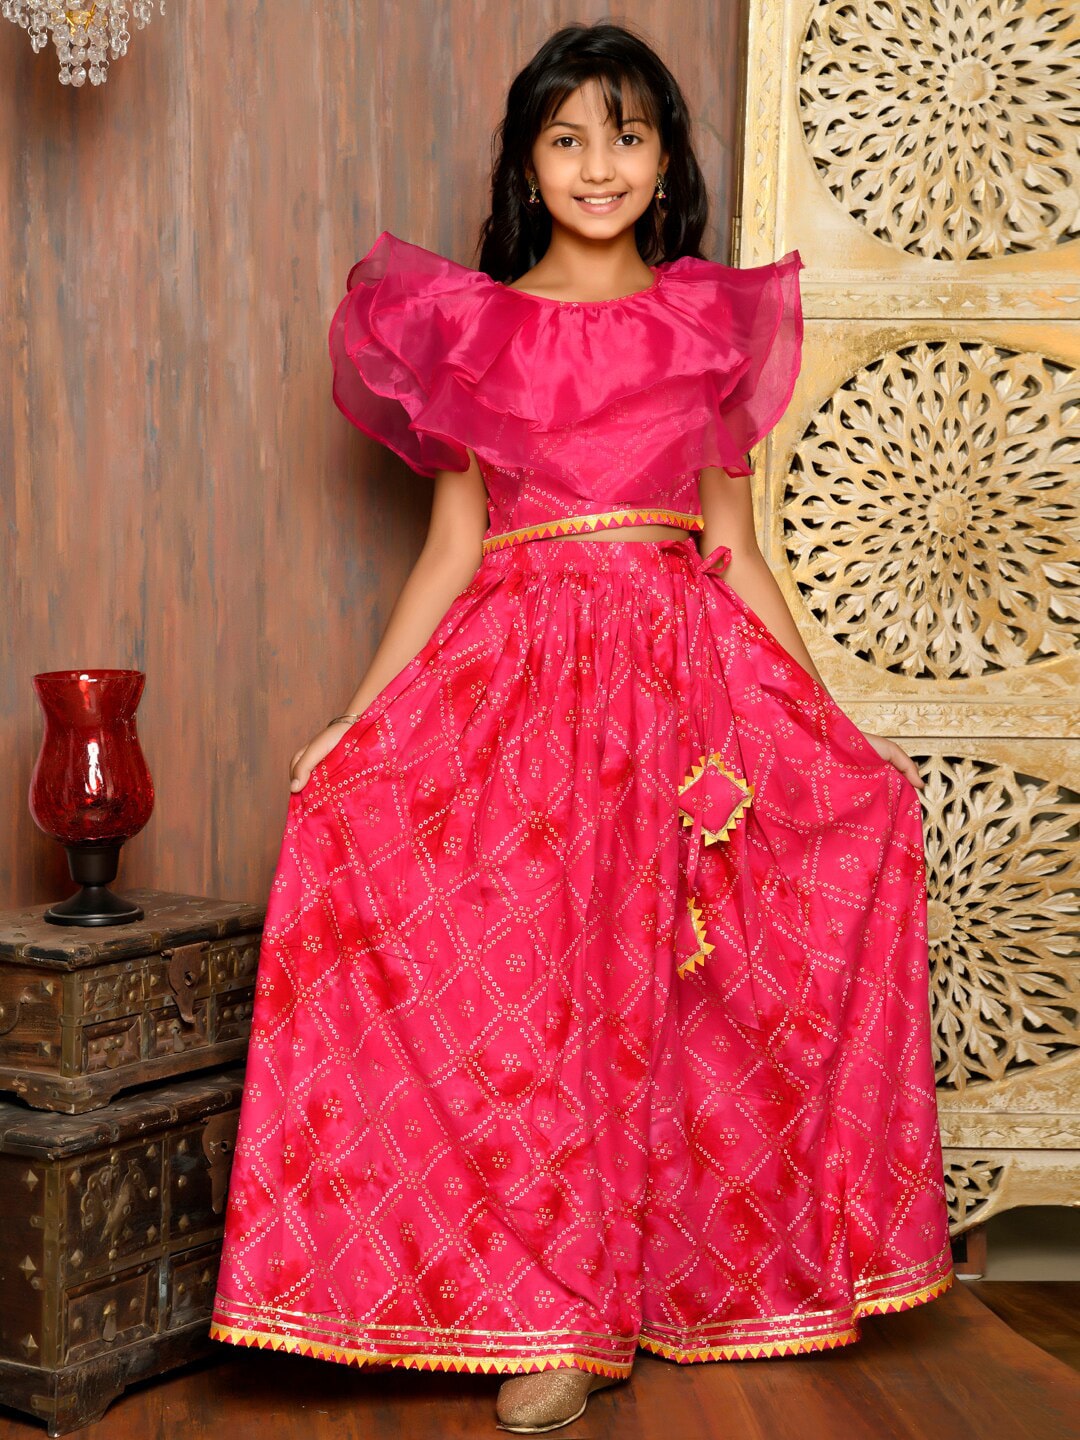 LilPicks Girls Pink & Gold-Toned Ready to Wear Lehenga & Price in India